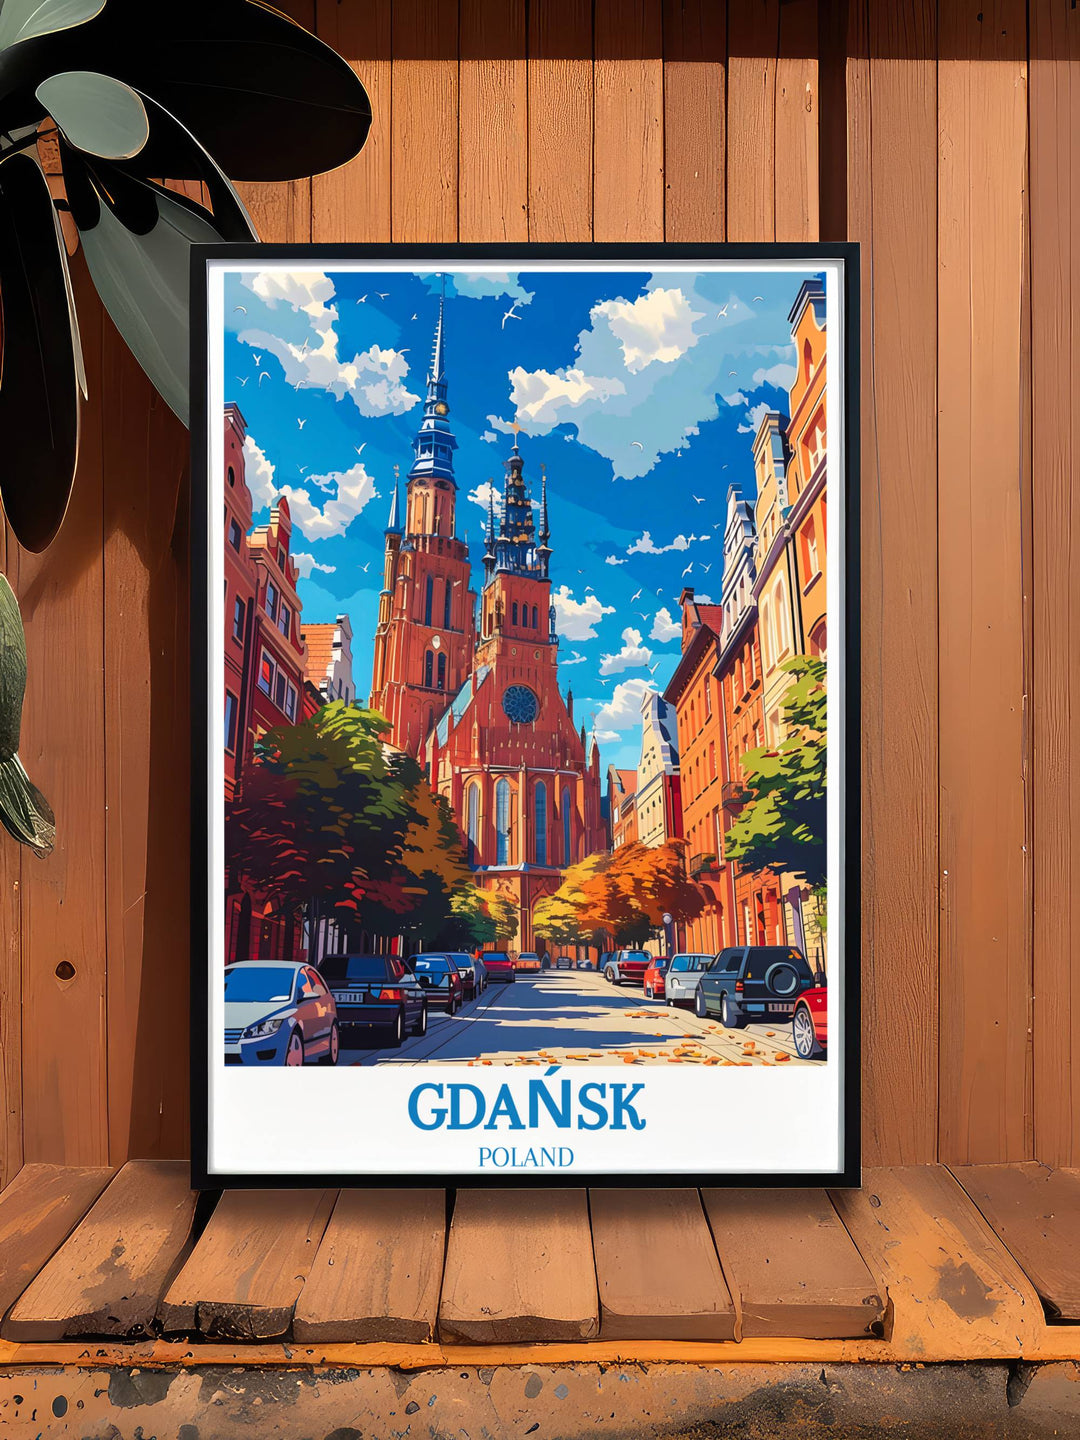 A stunning Gdańsk Print capturing the serene waterfront and bustling life of Gdańsk, offering a slice of the citys tranquil yet lively atmosphere.